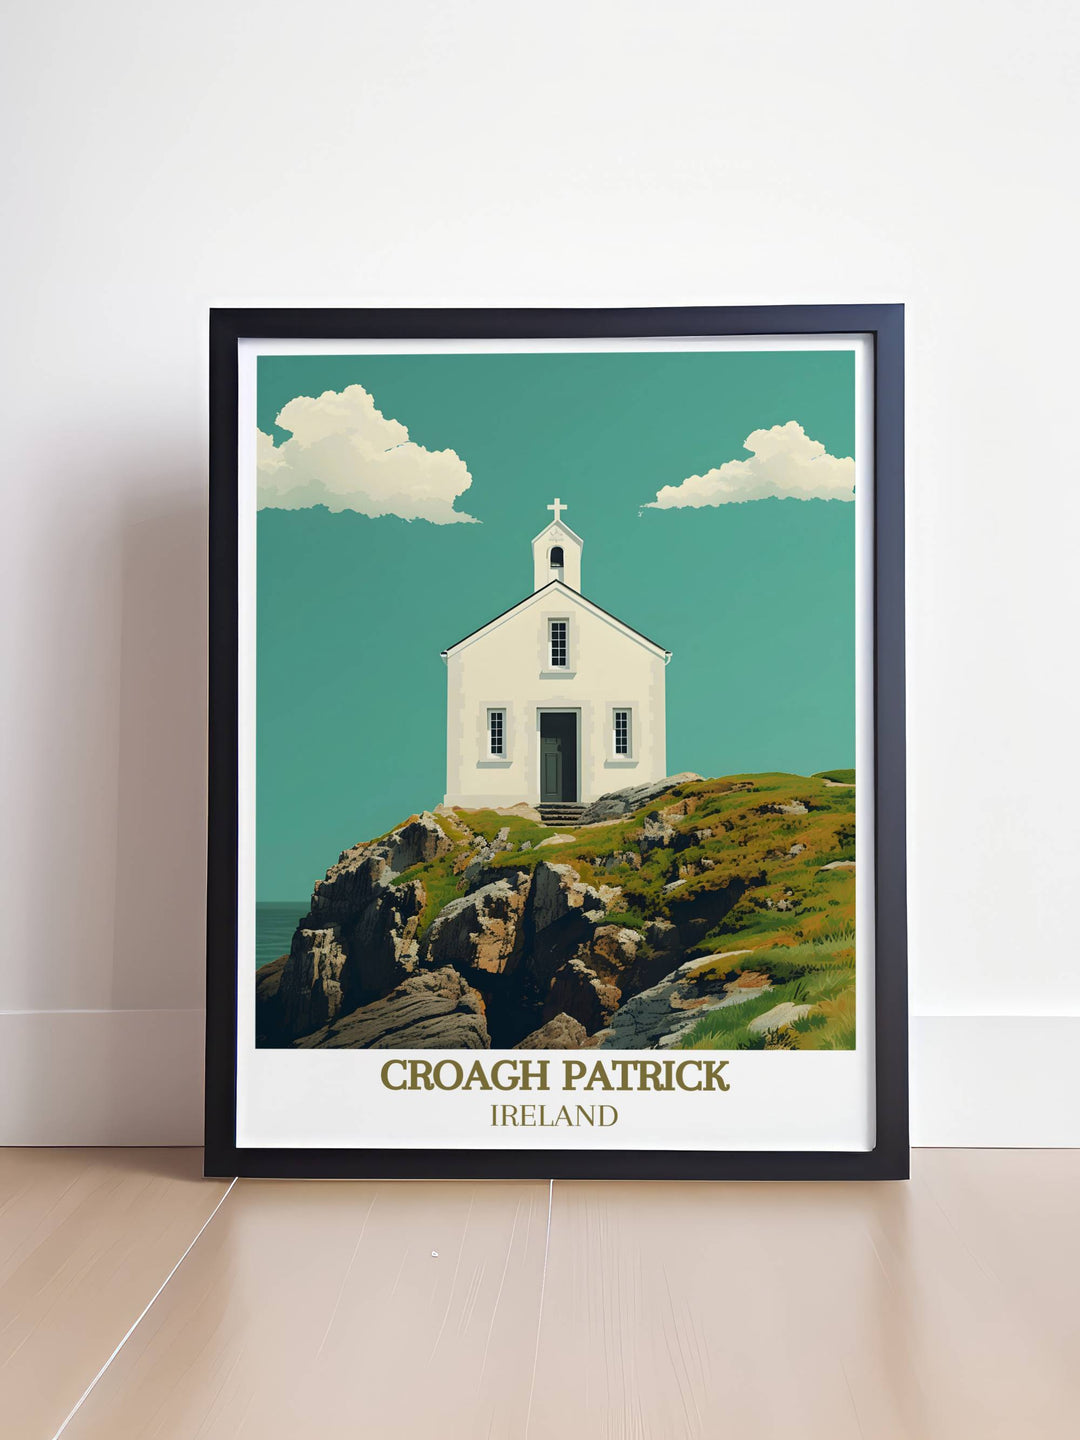 Celebrate Irish heritage with this Ireland travel print featuring Croagh Patrick and the historic St Patricks Church. This artwork beautifully captures the essence of Westport Ireland ideal for home decor